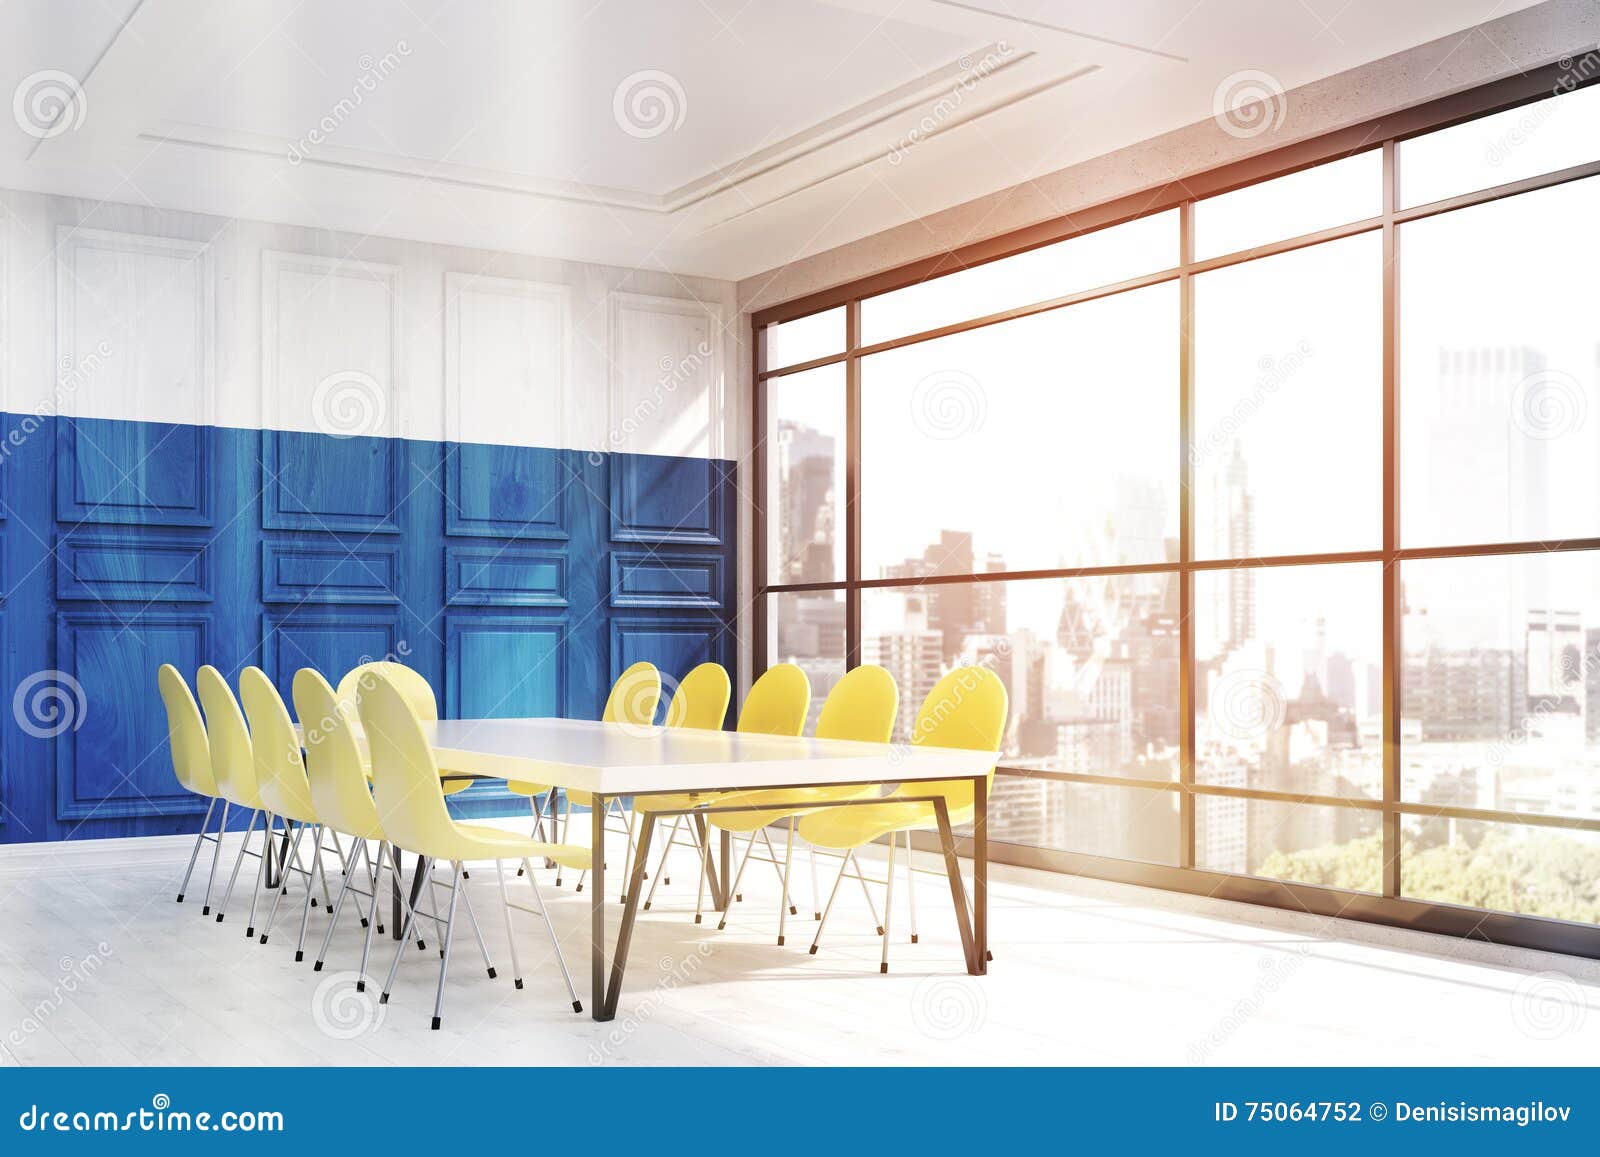 New York Office Interior With Blue Wall Stock Illustration